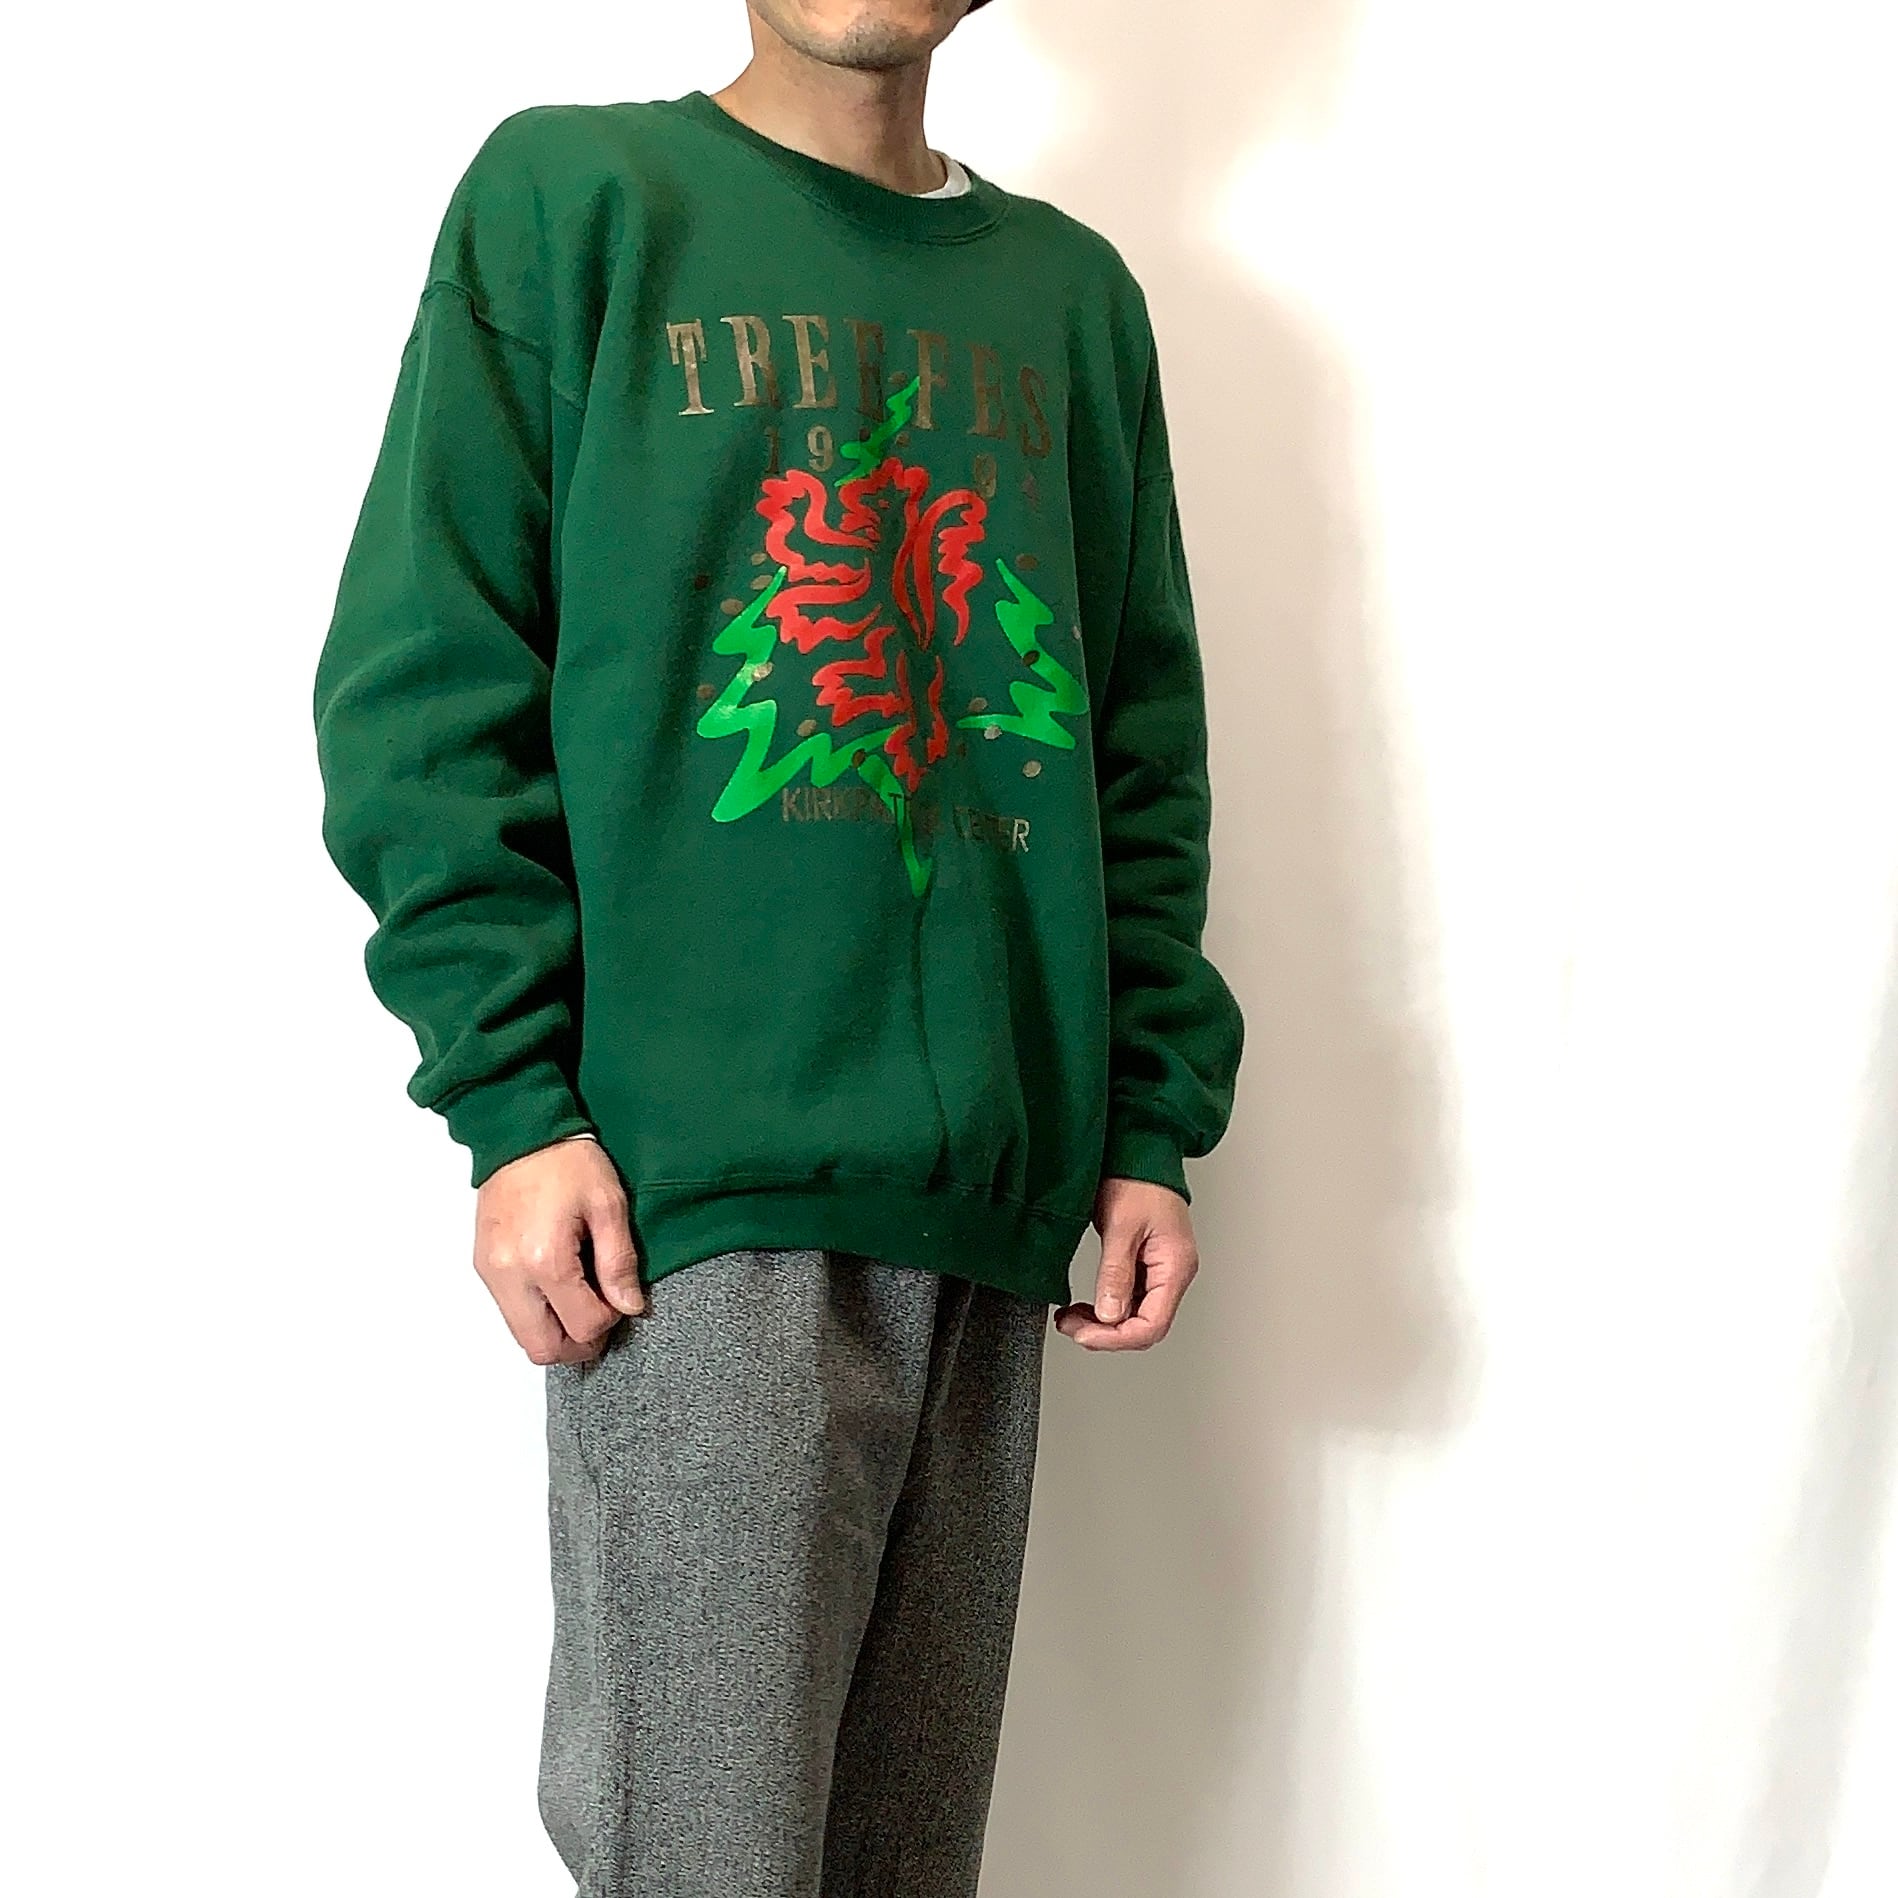 vintage 90s print sweat プリントスウェット メンズ レディース グリーン Lee made in usa size XL